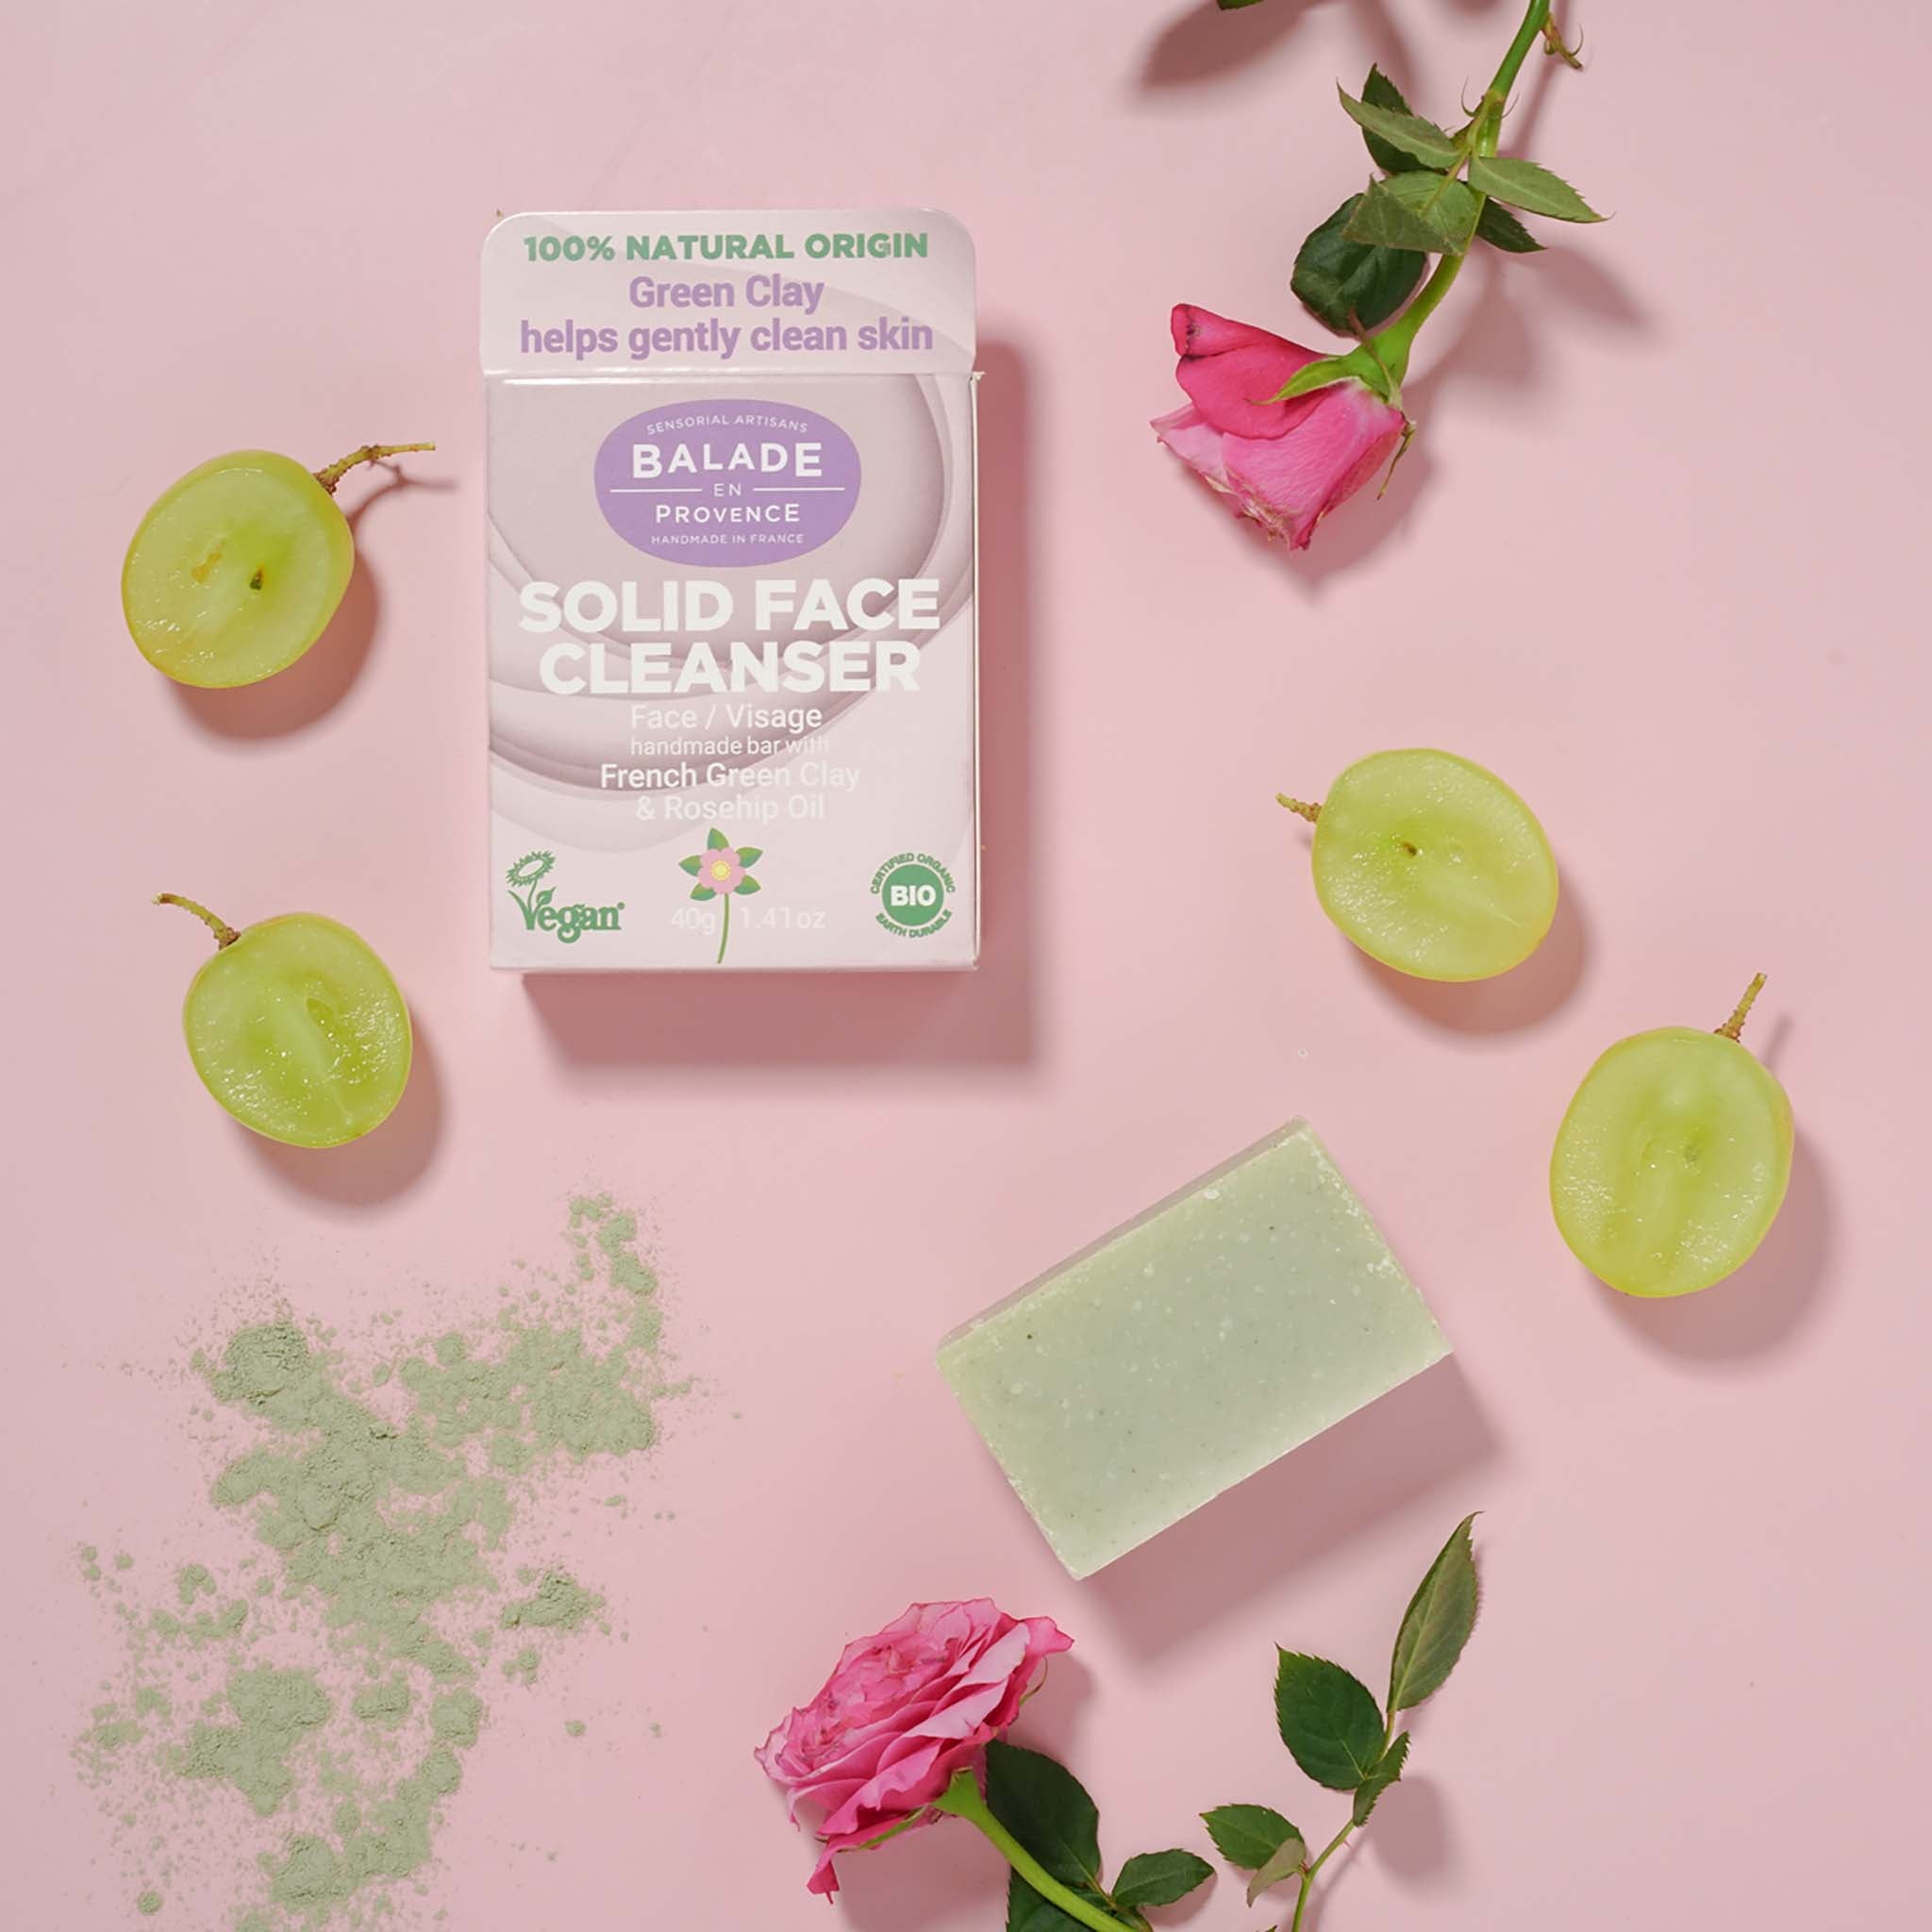 Solid Face Cleansing Bar - mypure.co.uk